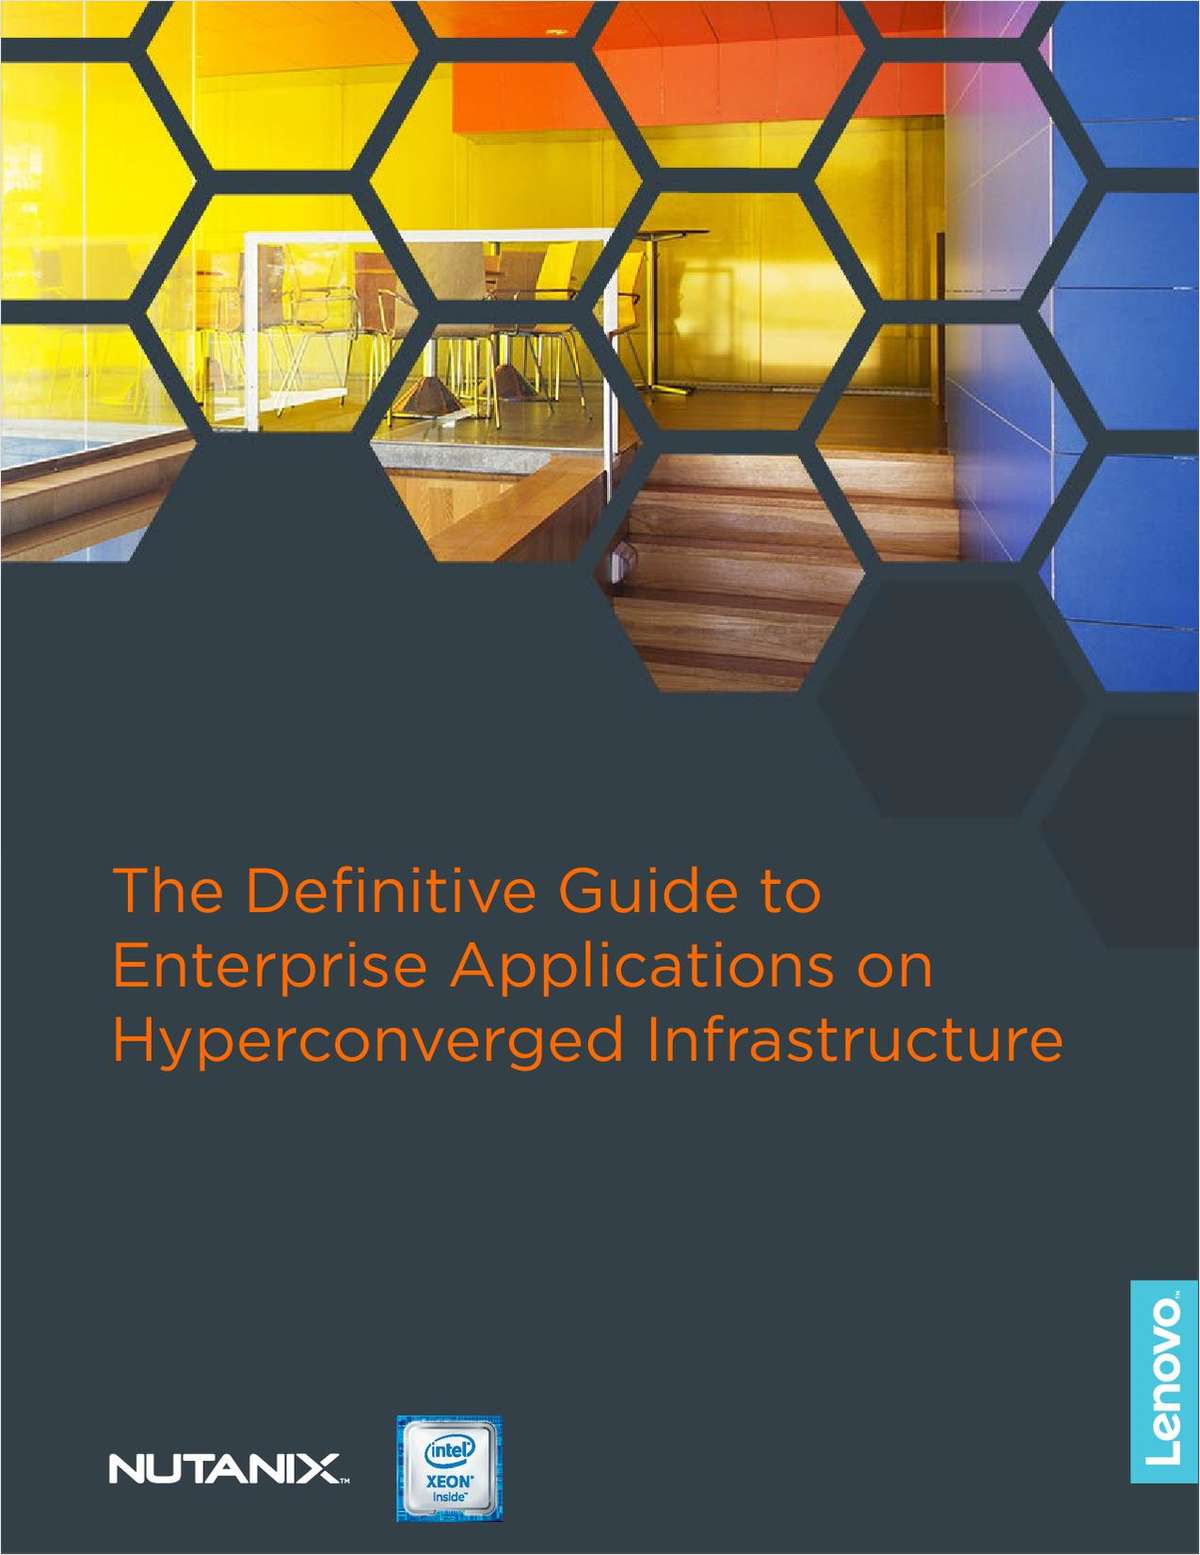 The Definitive Guide to Enterprise Applications on Hyperconverged Infrastructure